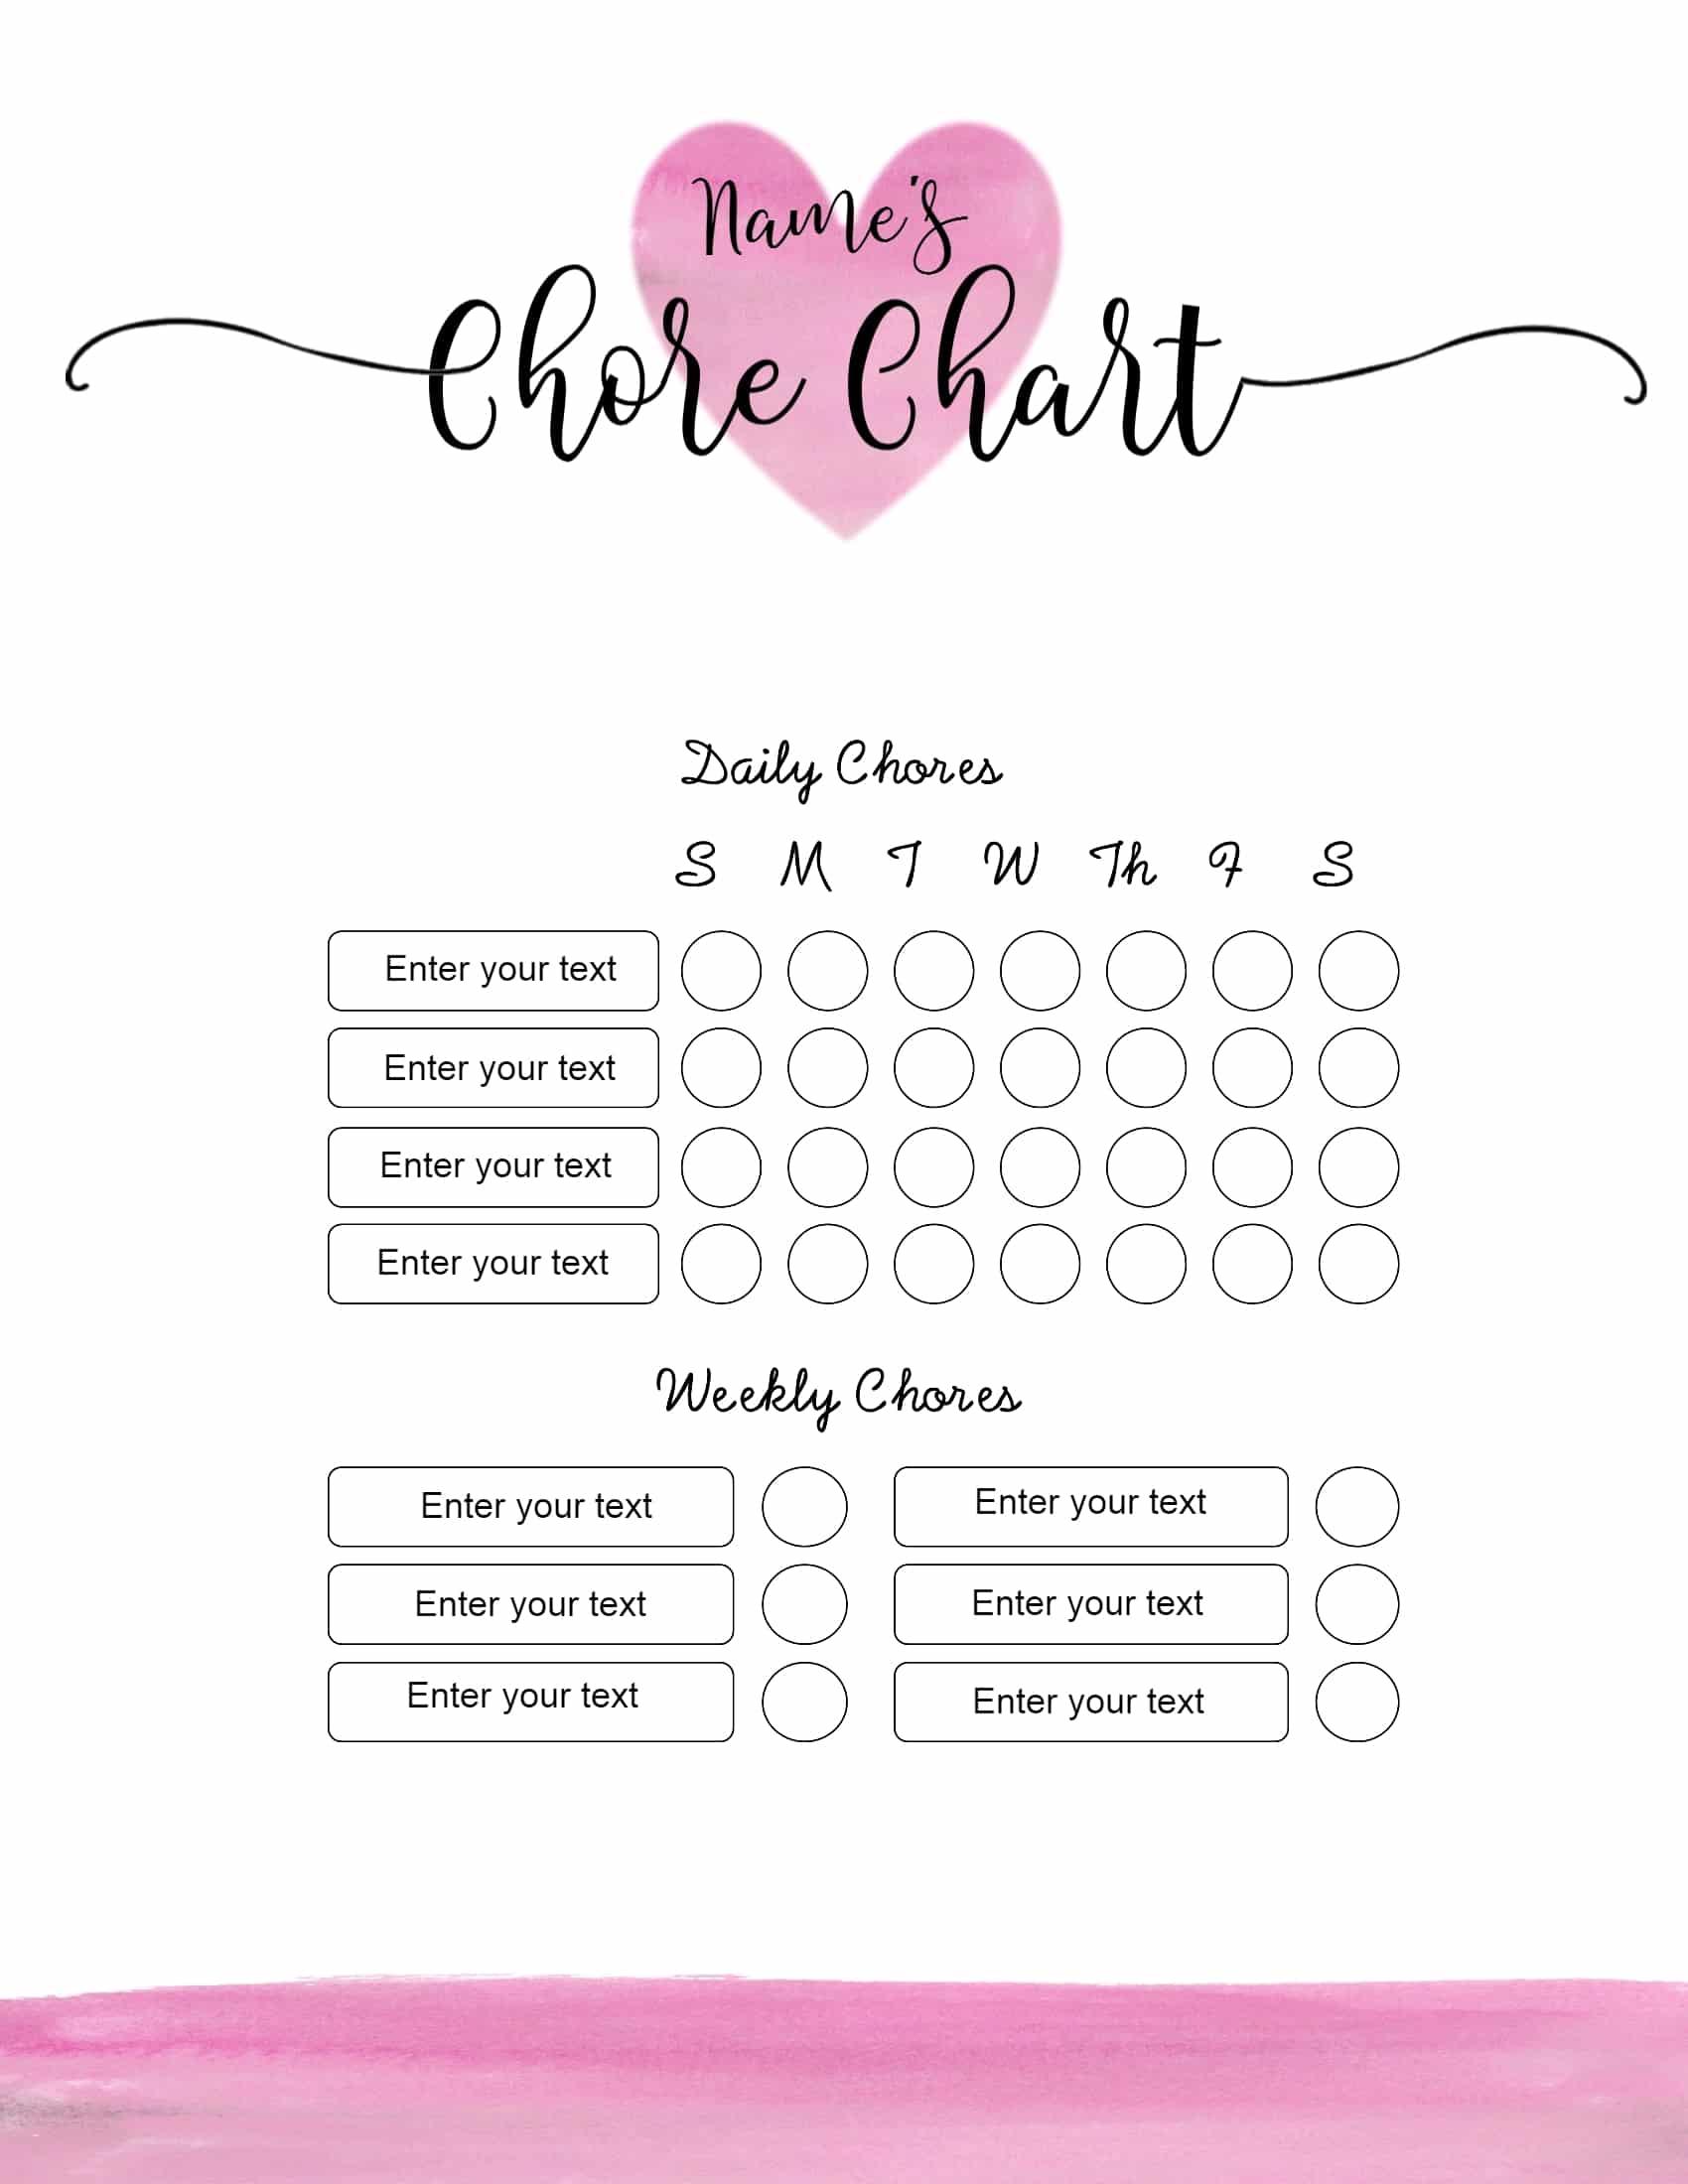 FREE chore chart template | 101 Different Designs